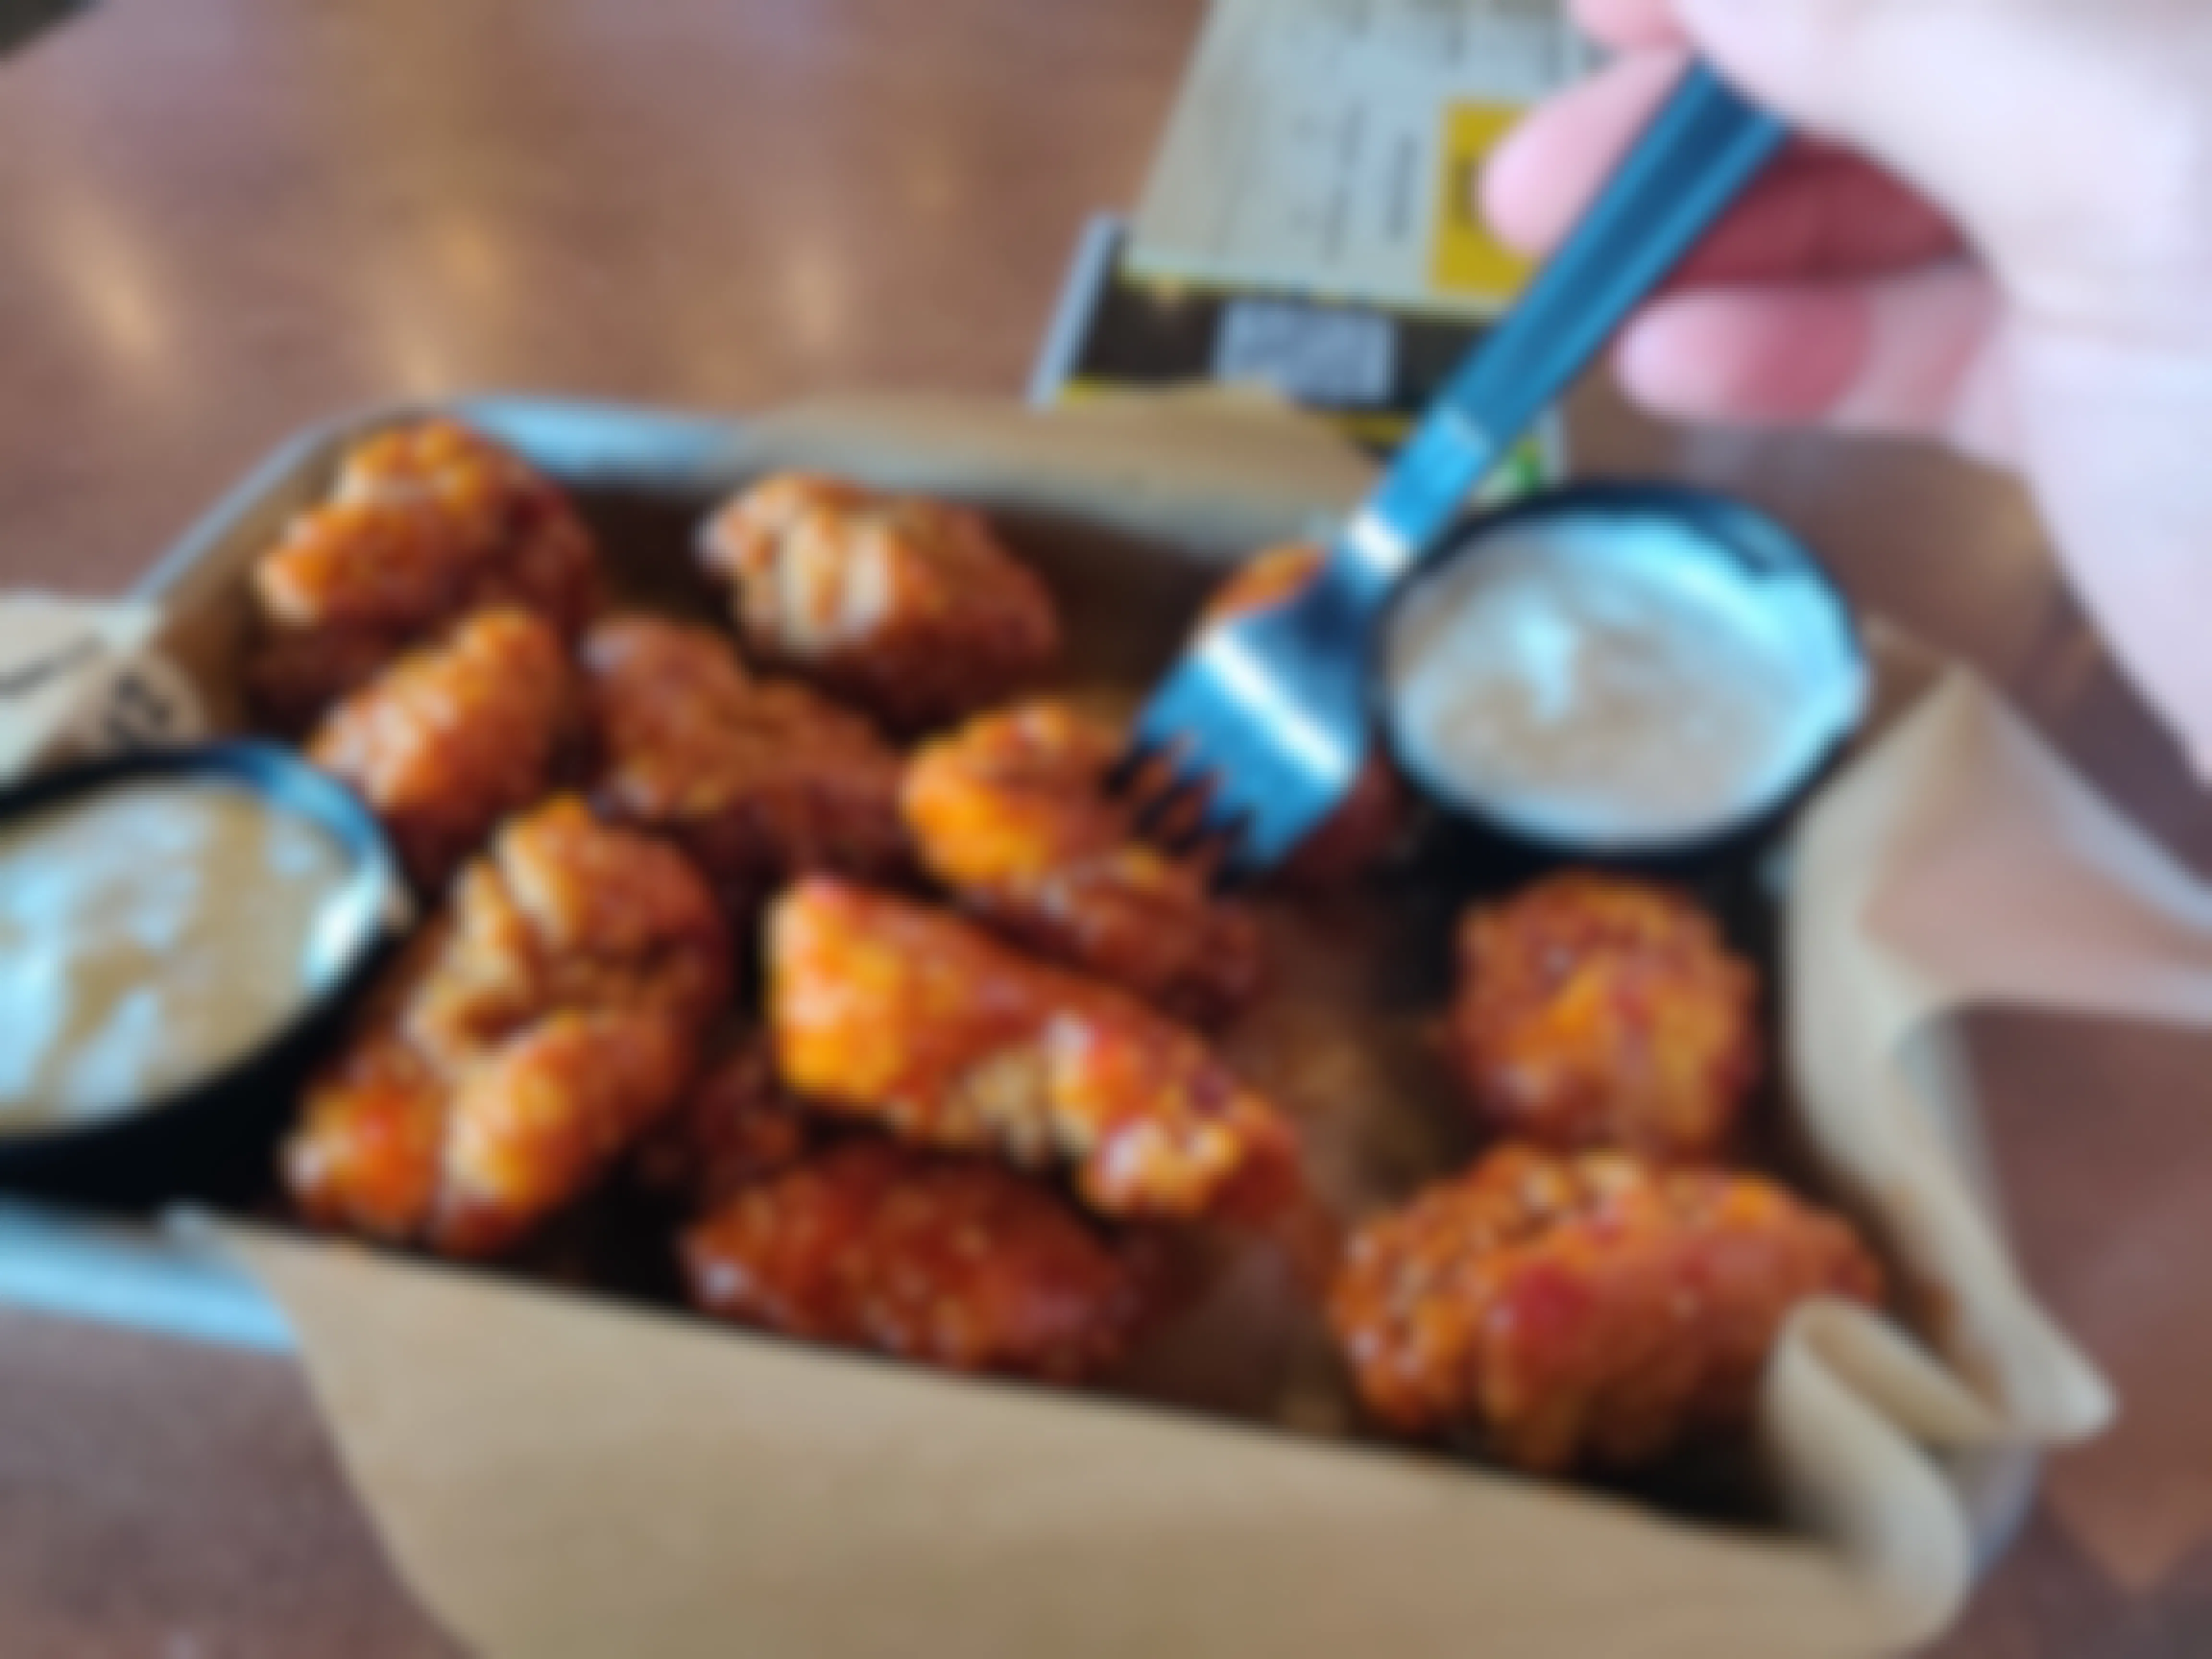 National Chicken Wing Day Was July 29! Buffalo Wild Wings Had Free Wings With $10 Purchase